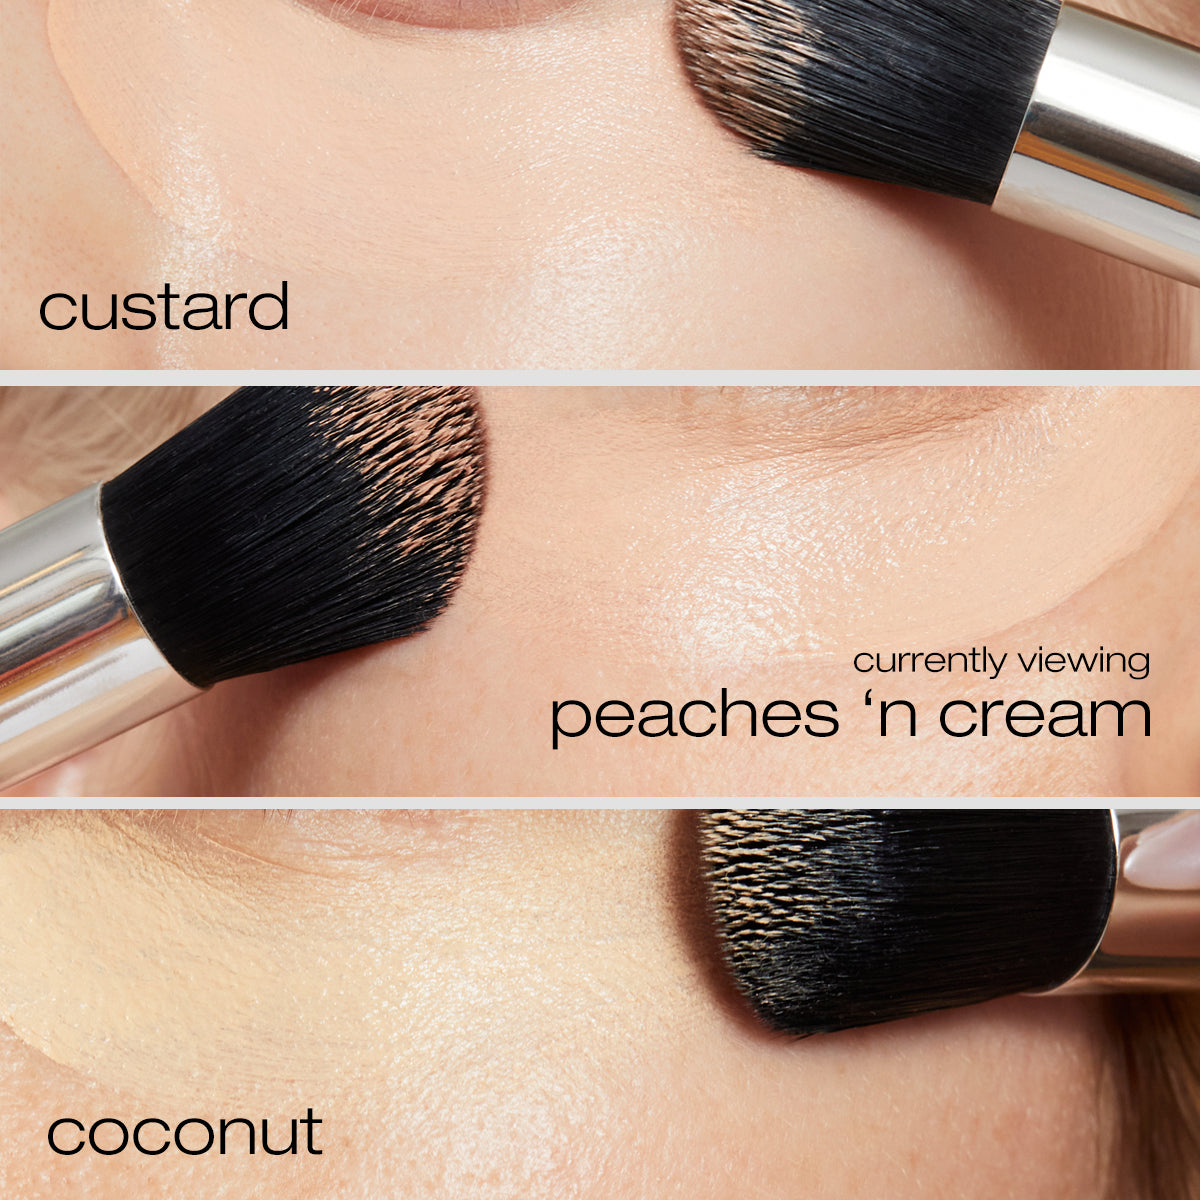 Custard, Peaches 'n cream, and coconut concealer refill covering undereyes